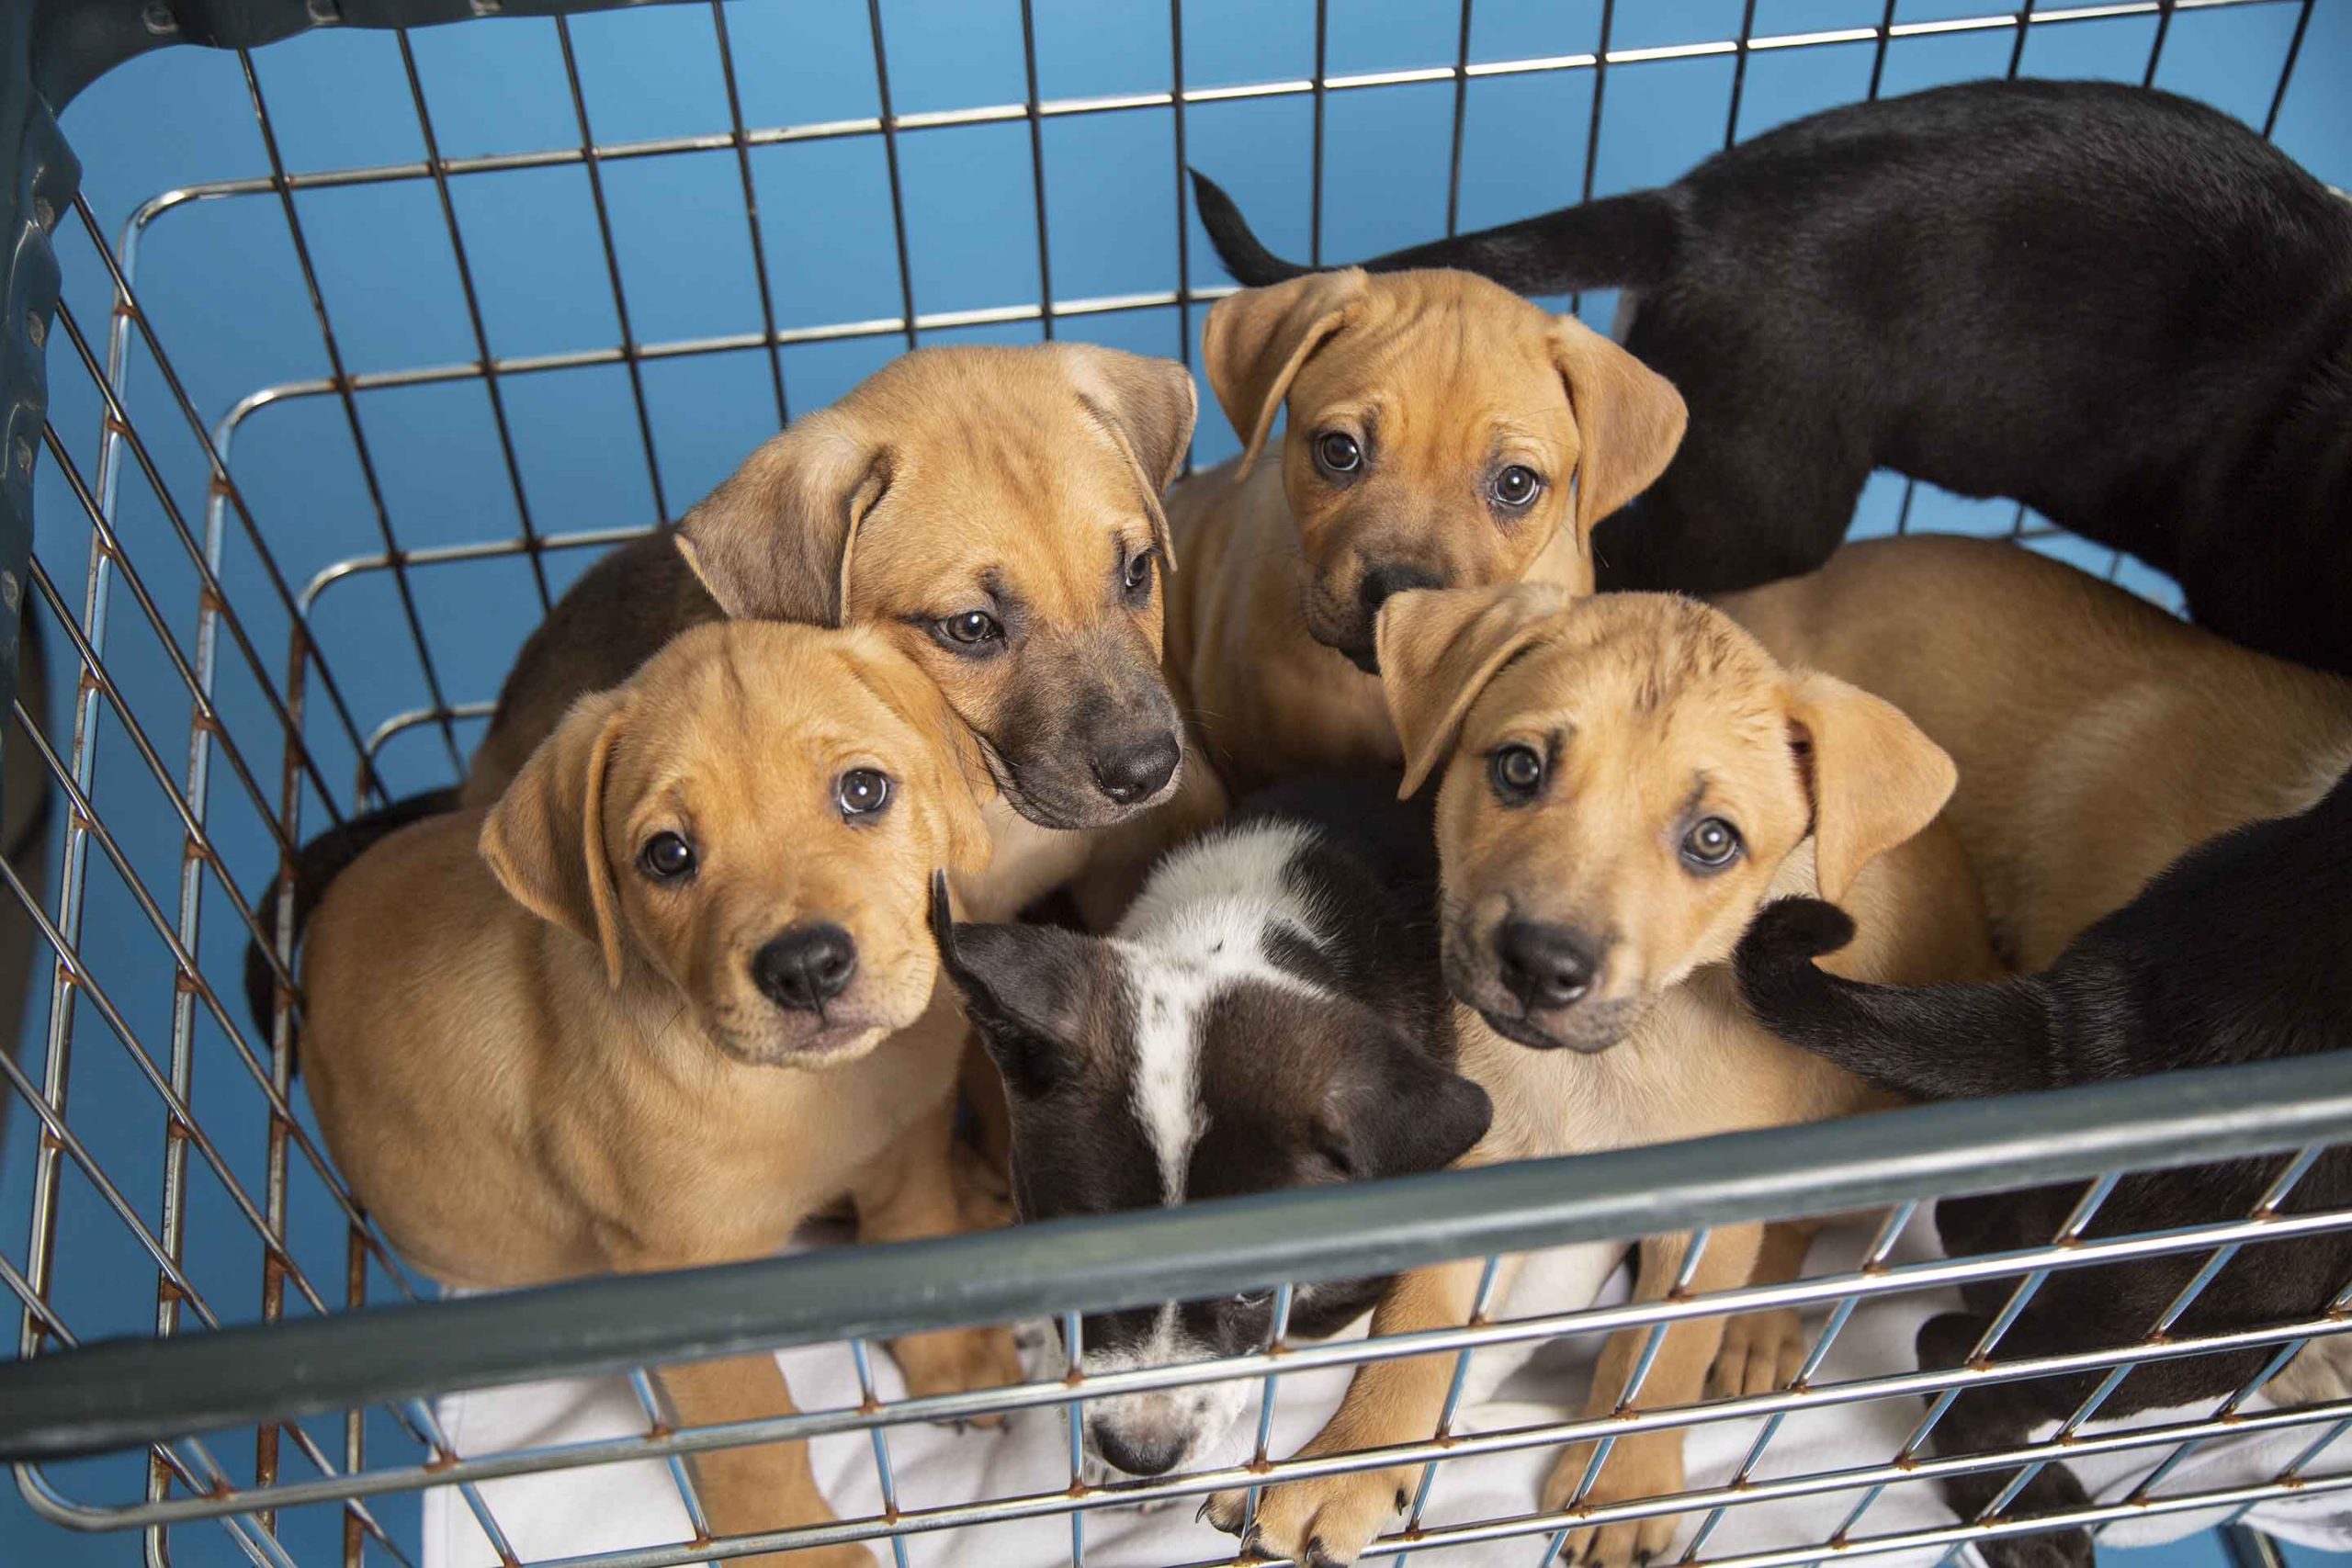 several puppies in a metal basket